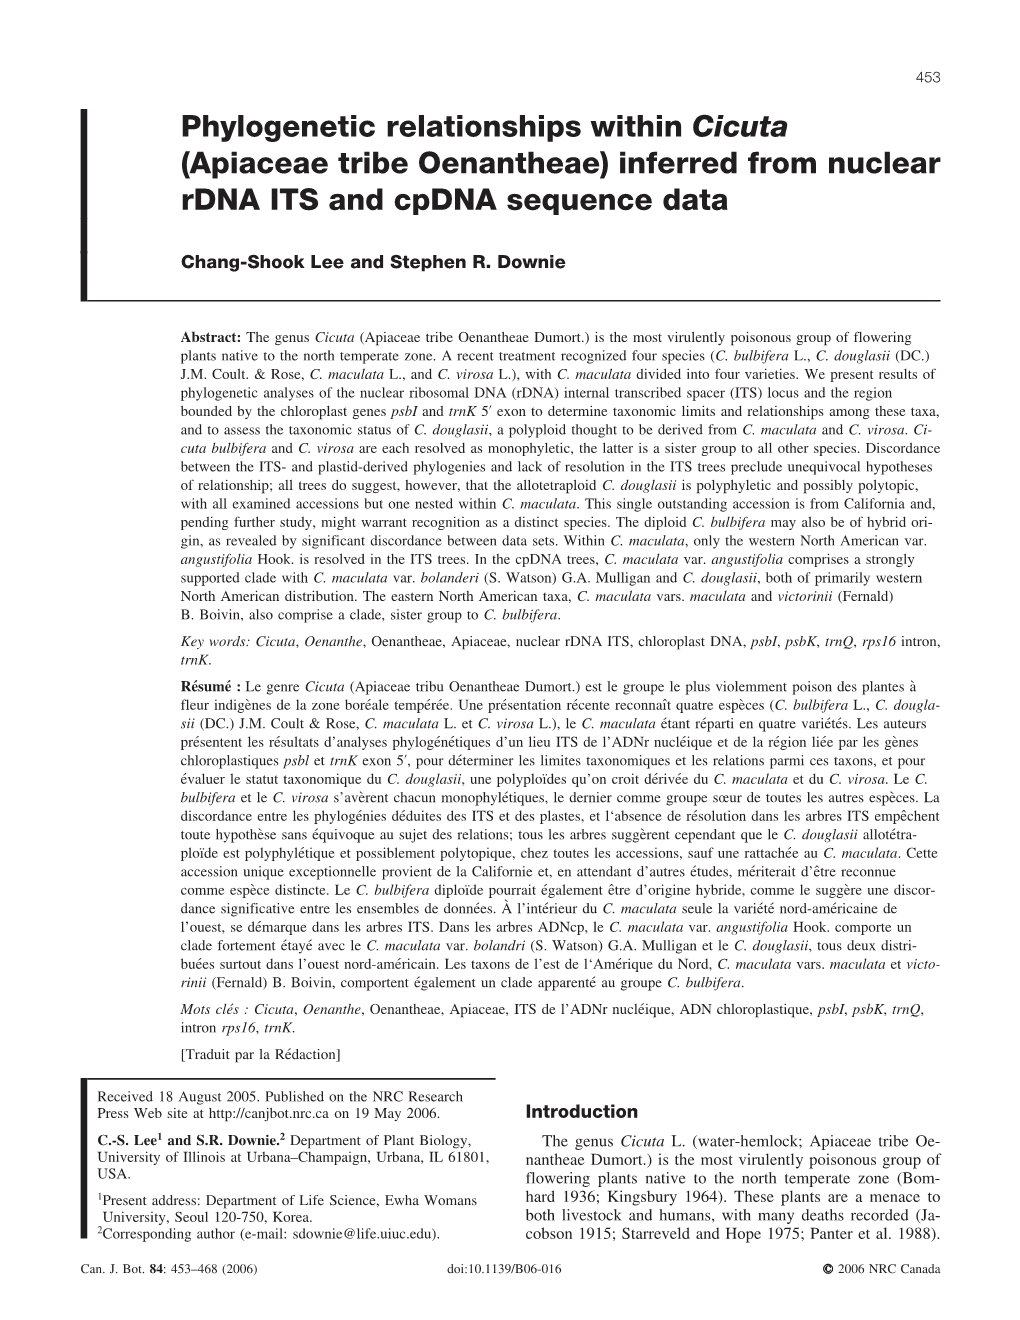 Phylogenetic Relationships Within Cicuta (Apiaceae Tribe Oenantheae) Inferred from Nuclear Rdna ITS and Cpdna Sequence Data